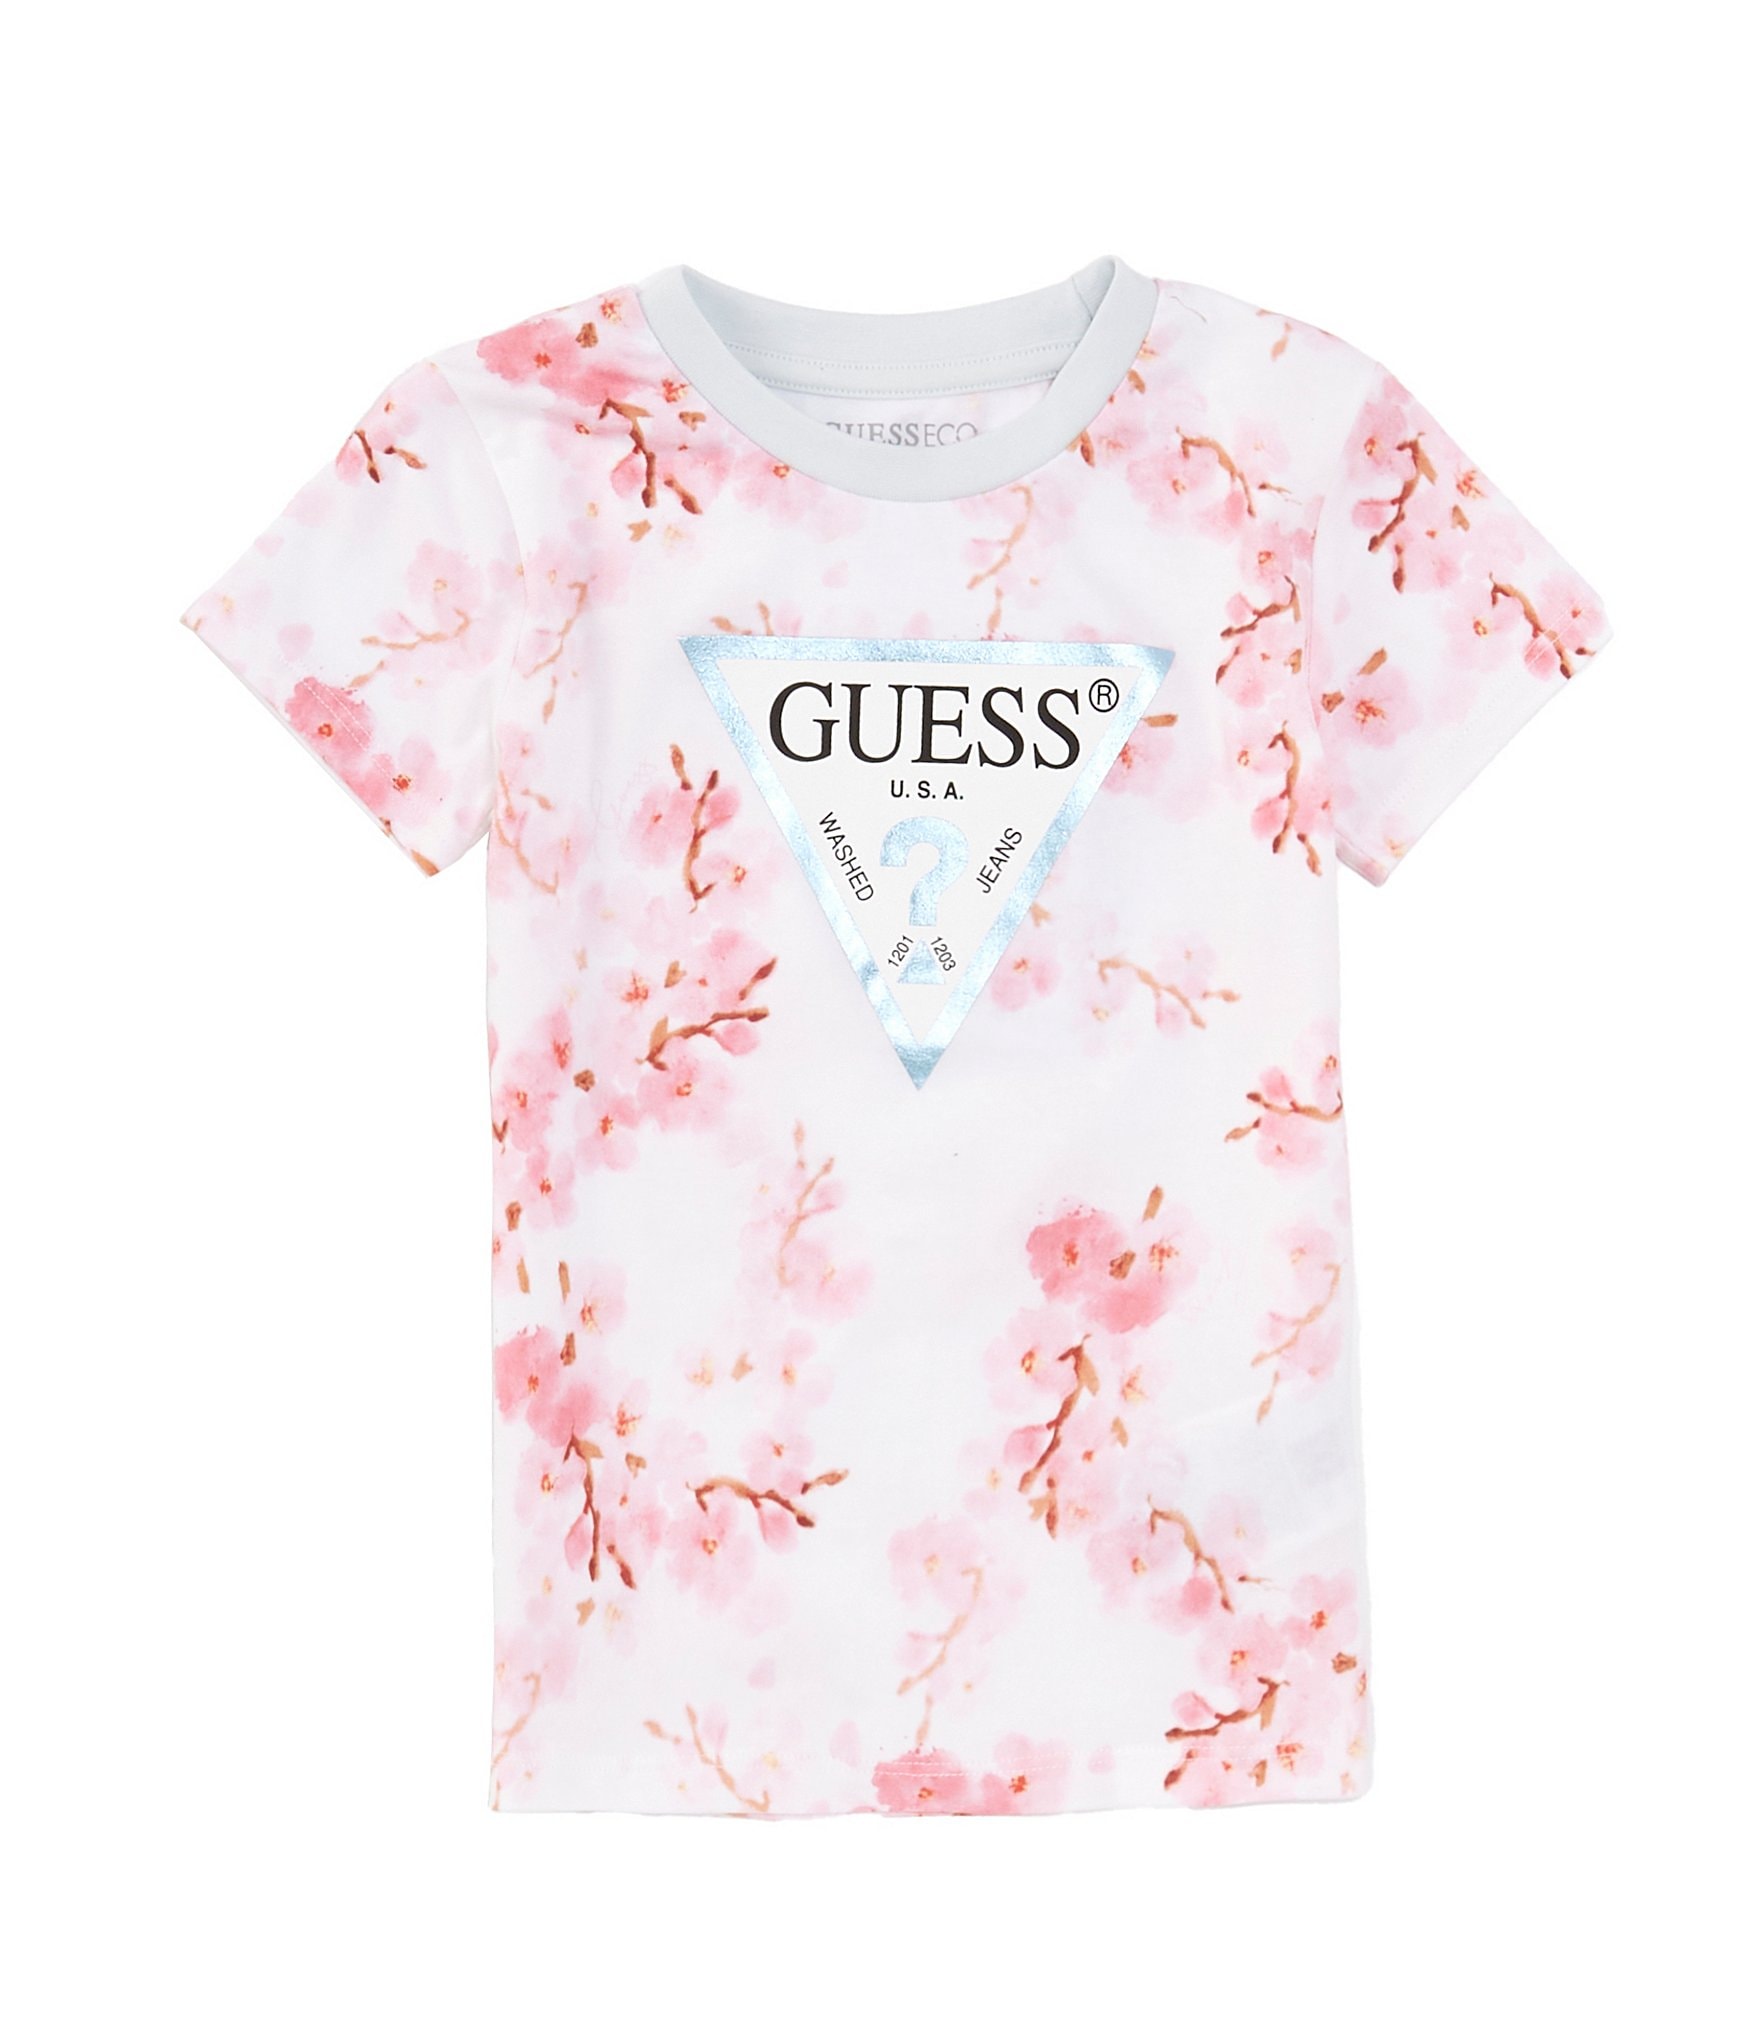 NEW GUESS BABY LOS ANGELES GIRL'S SHORT SLEEVE GOLD SIGNATURE LOGO